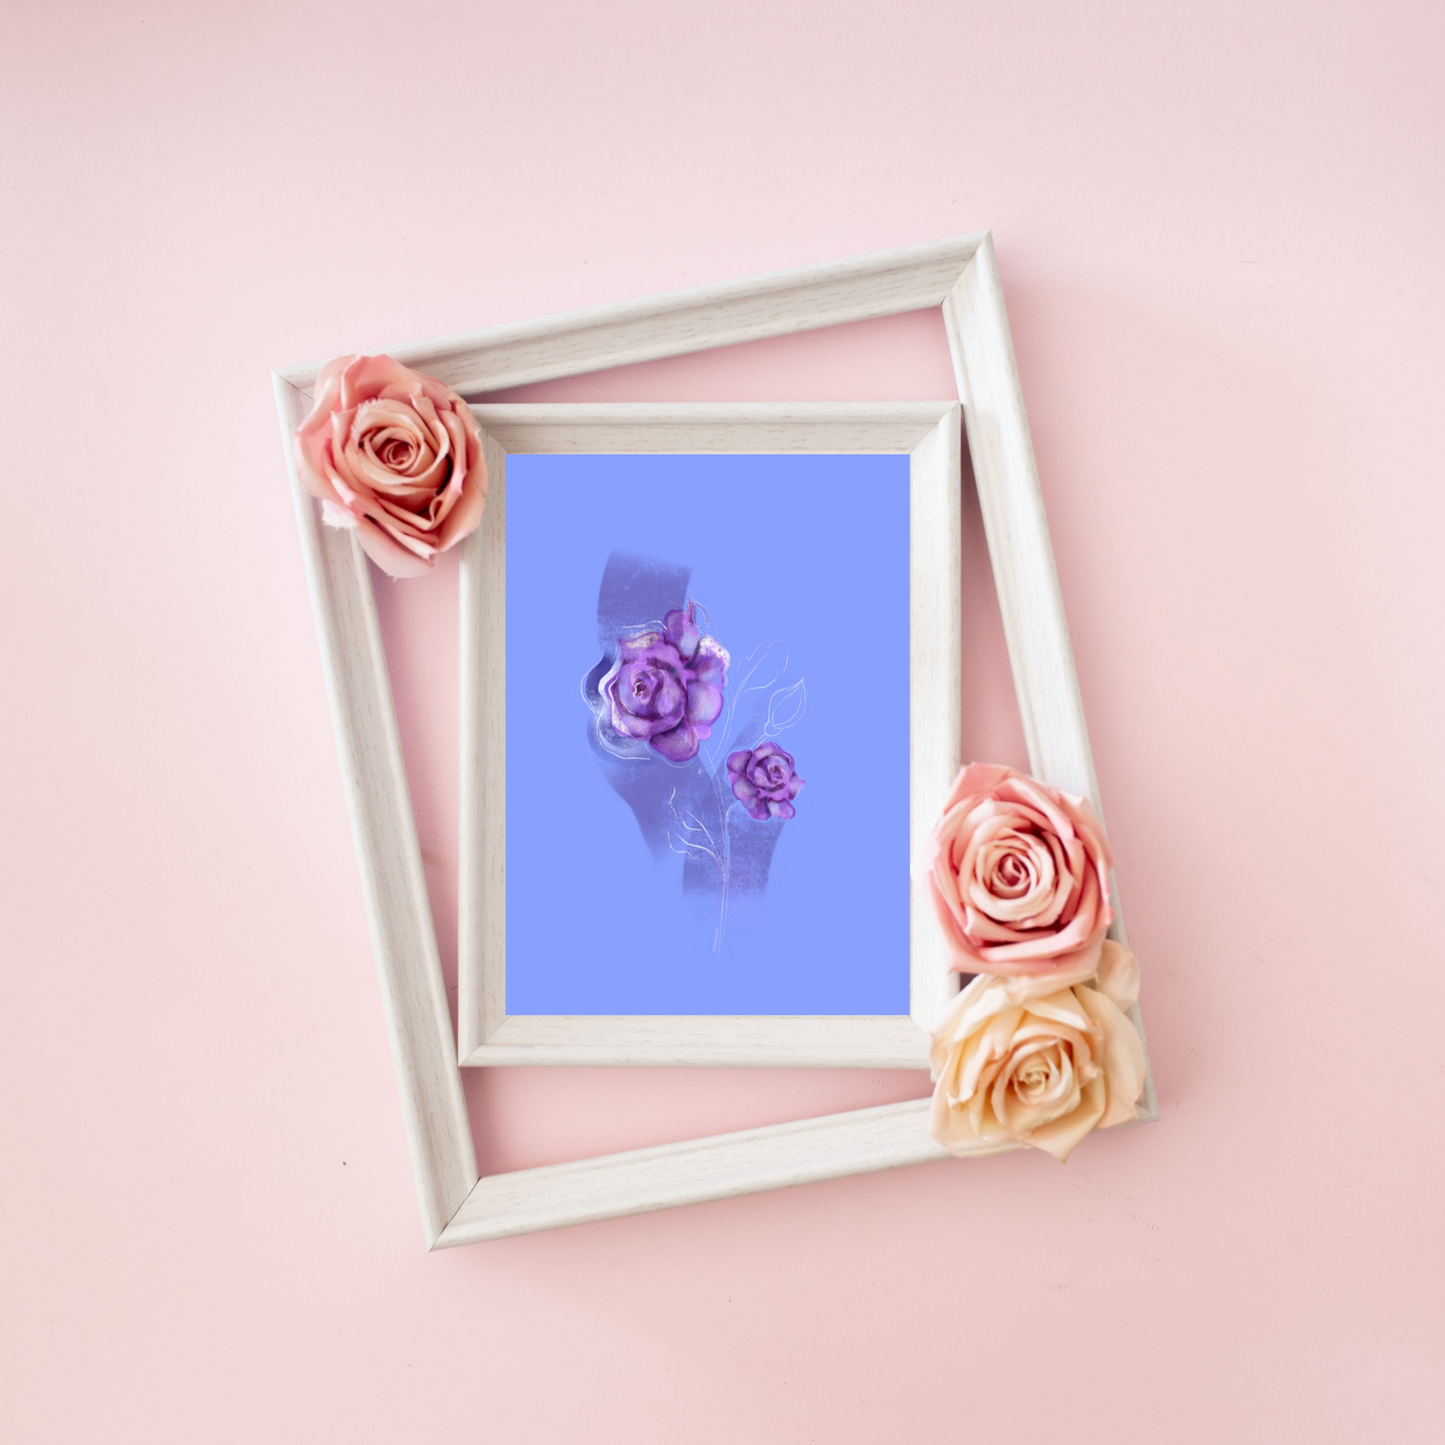 An example of the Rose painting by ArisaTeam in a frame